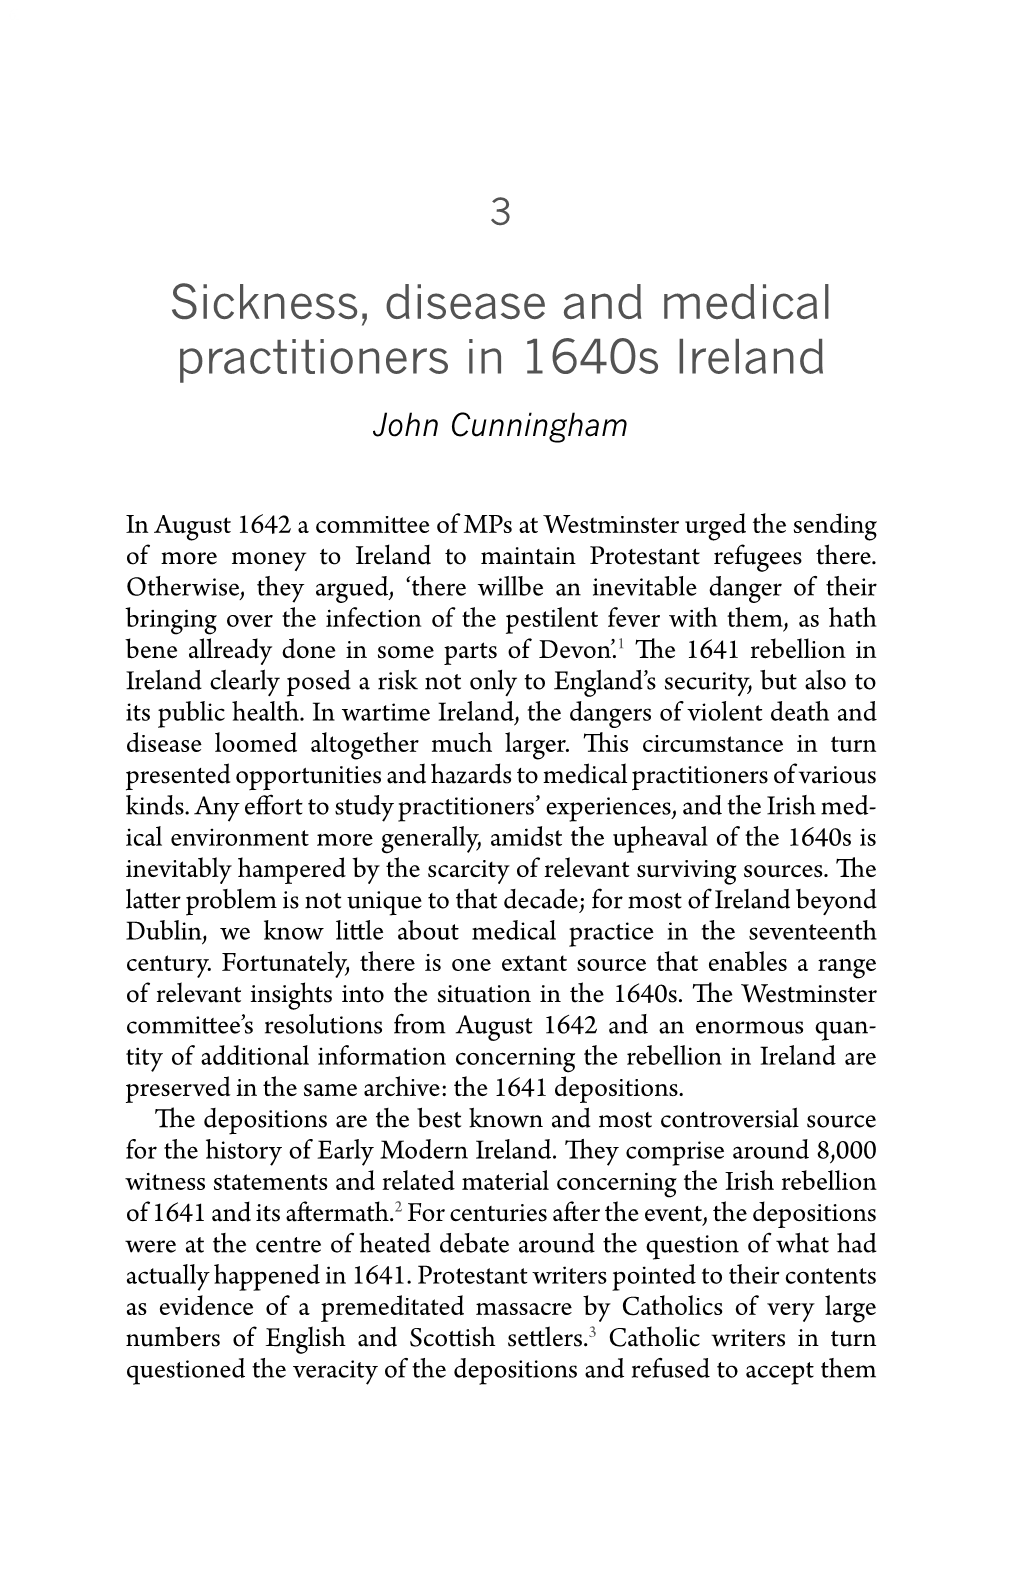 Early Modern Ireland and the World of Medicine: Practitioners, Collectors